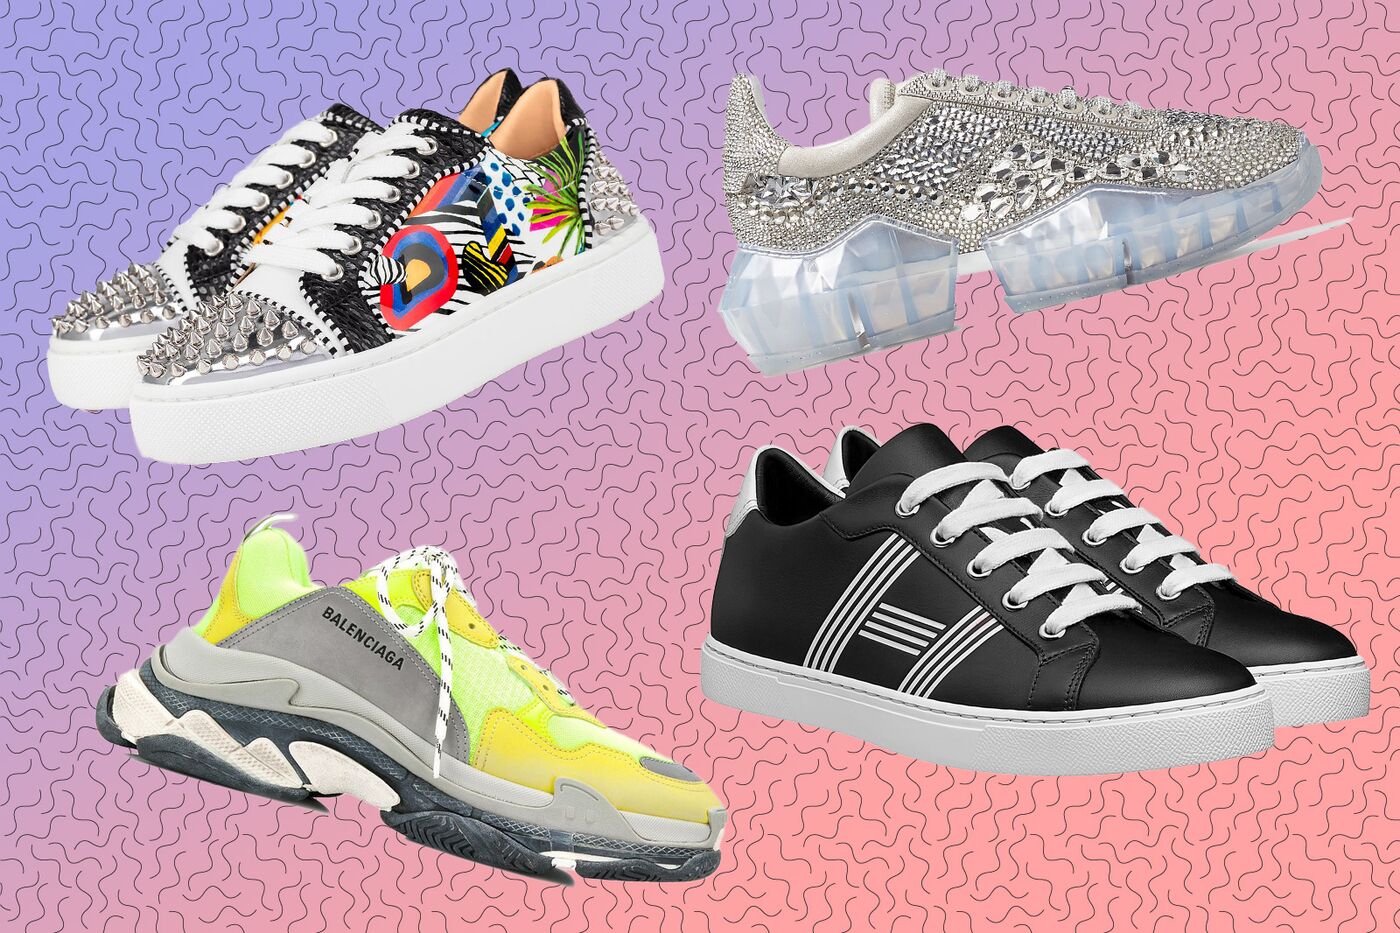 New Stilettos Are $4,400 Sneakers as Pandemic Accelerates Casual Trend ...